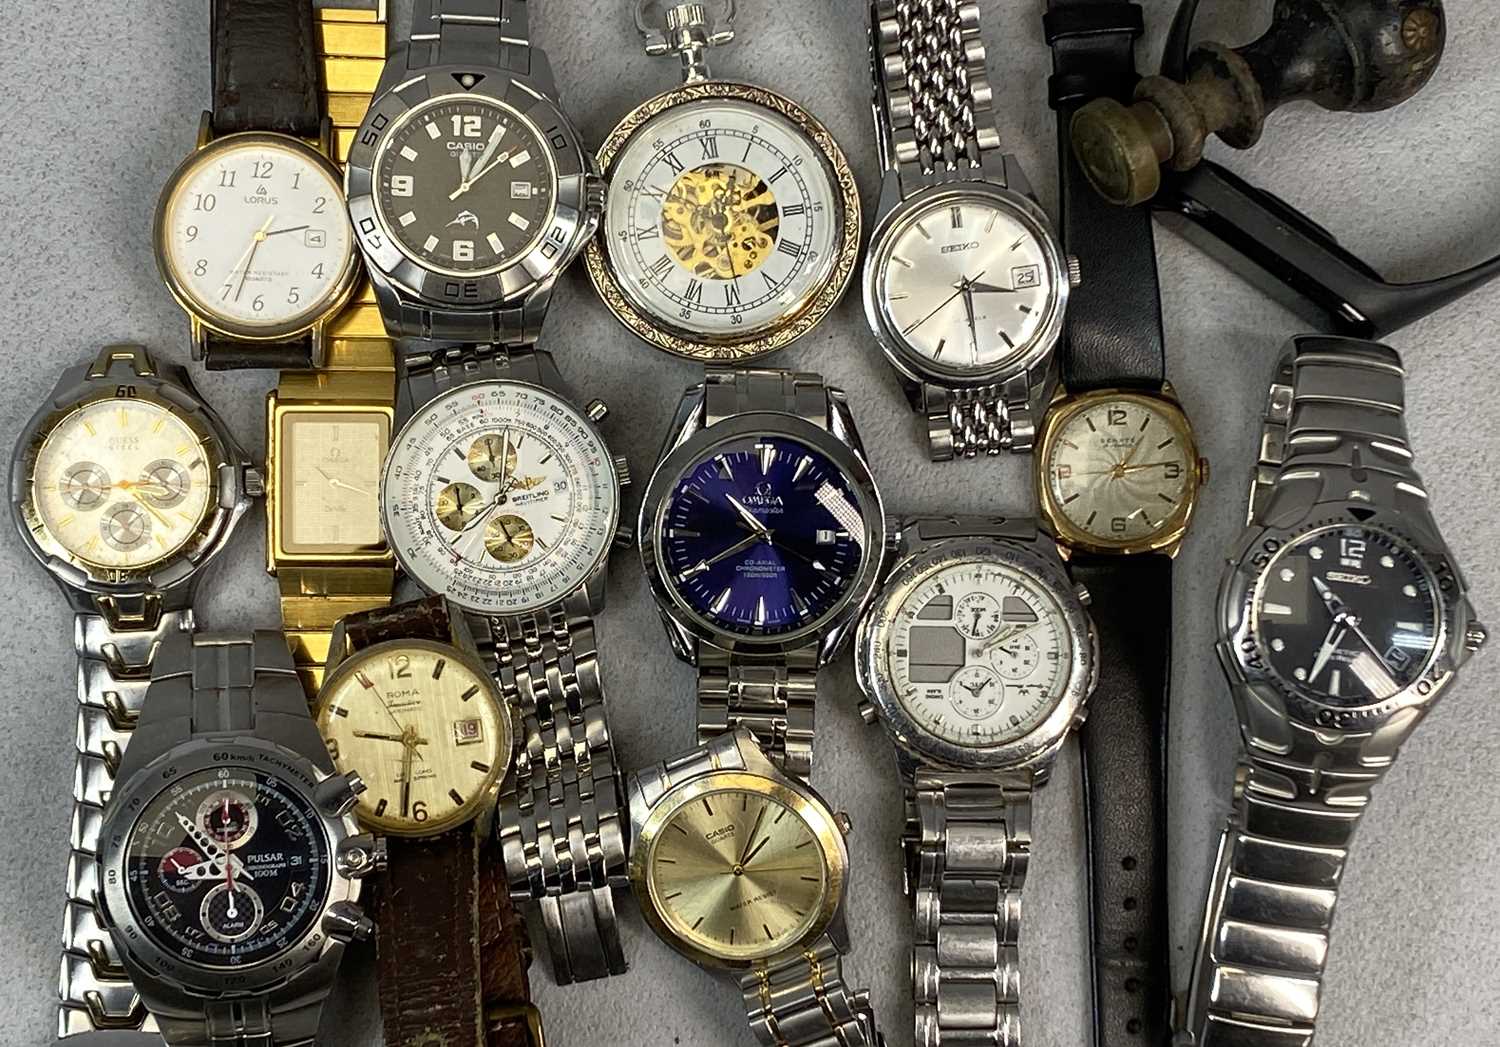 COLLECTION OF GENT'S WRISTWATCHES including Omega Deville gold plated bracelet watch, Seiko,